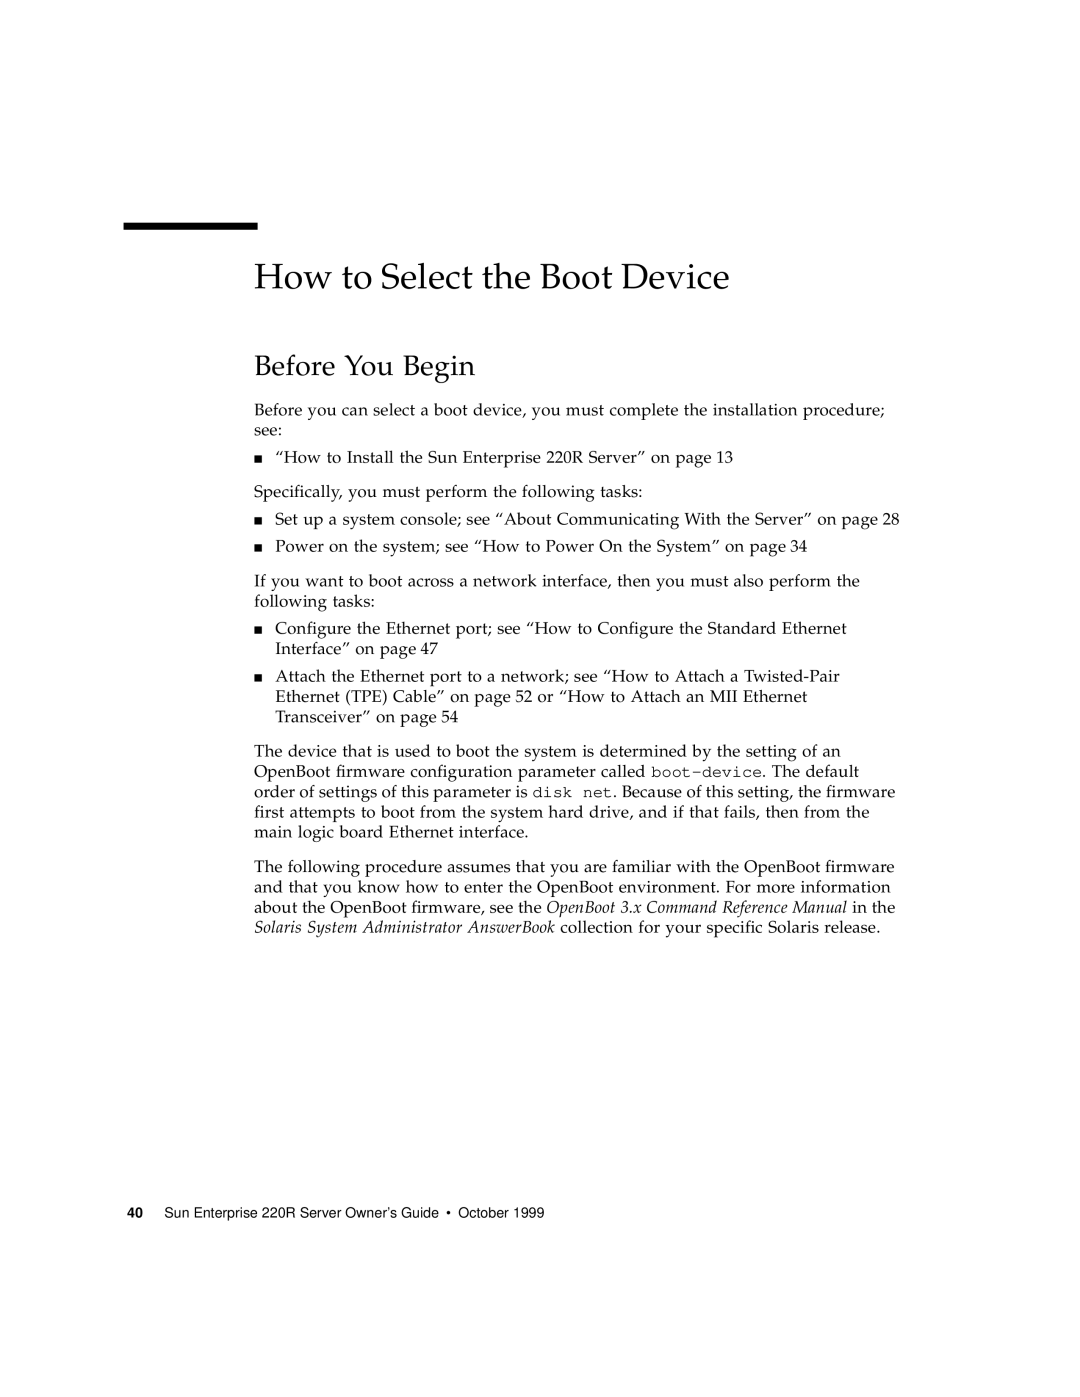 Sun Microsystems How to Select the Boot Device, Before You Begin, Sun Enterprise 220R Server Owner’s Guide October 